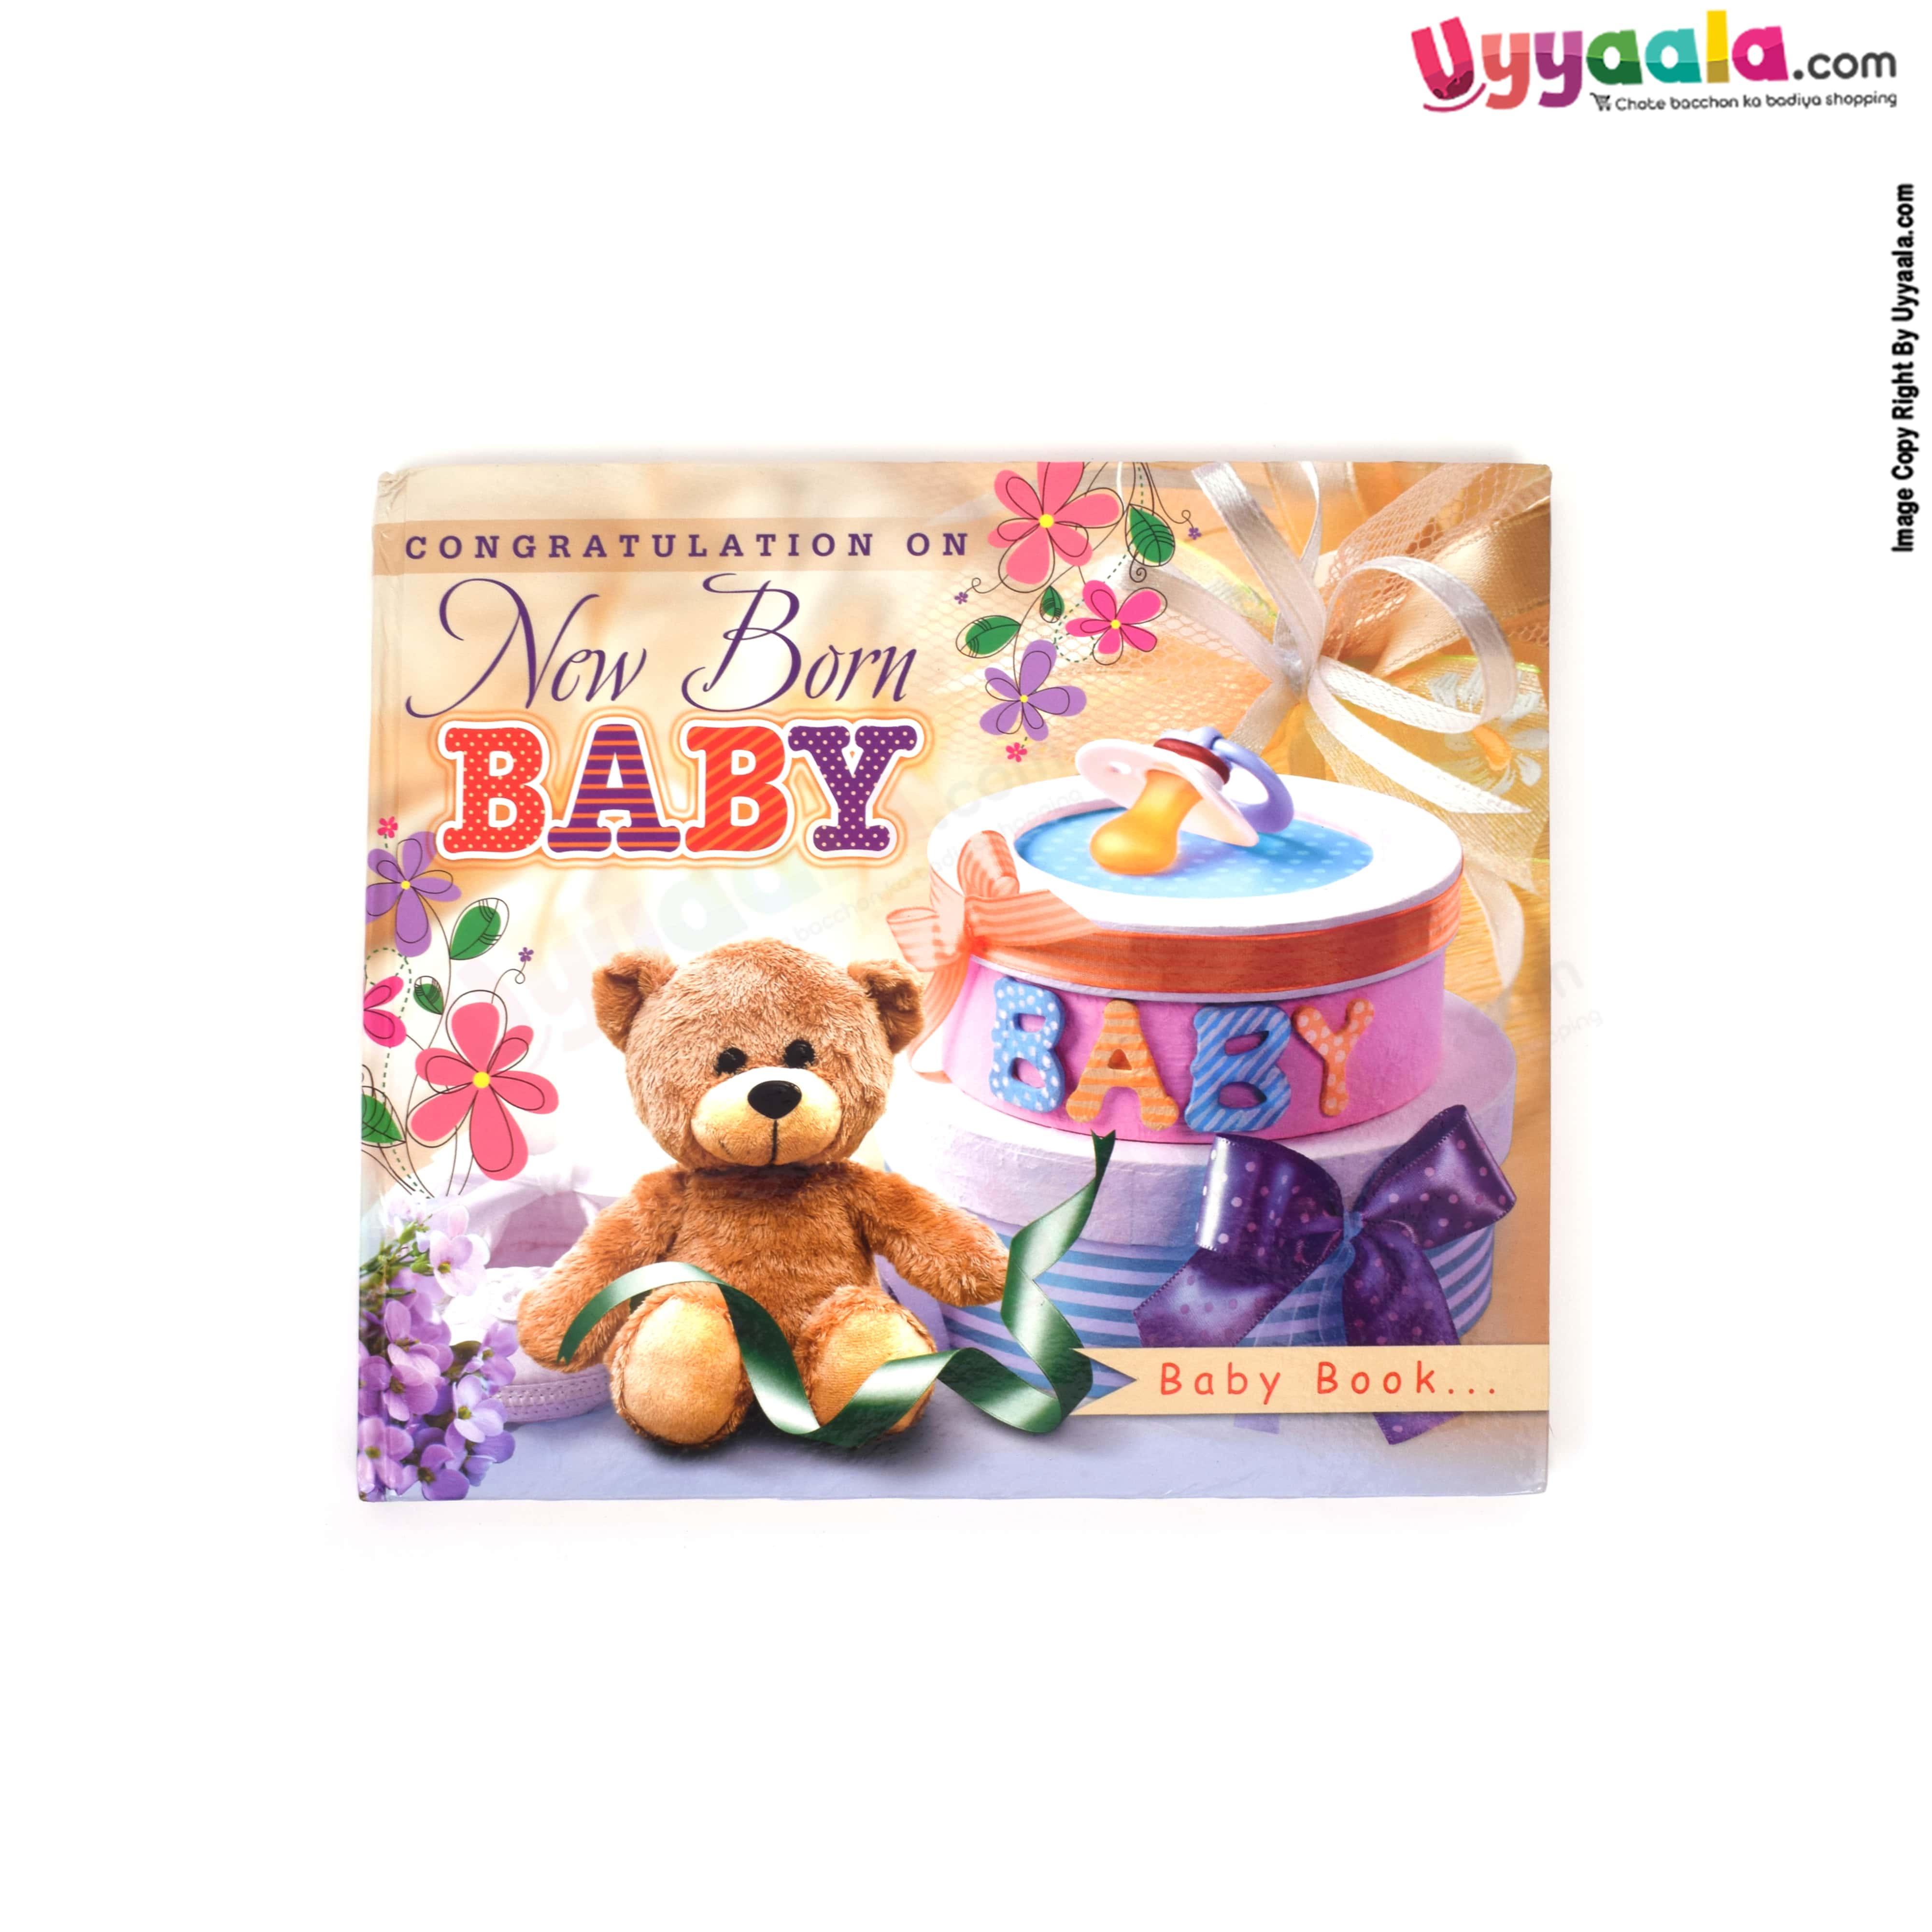 BABY record and memories book for new born baby (uni sex)